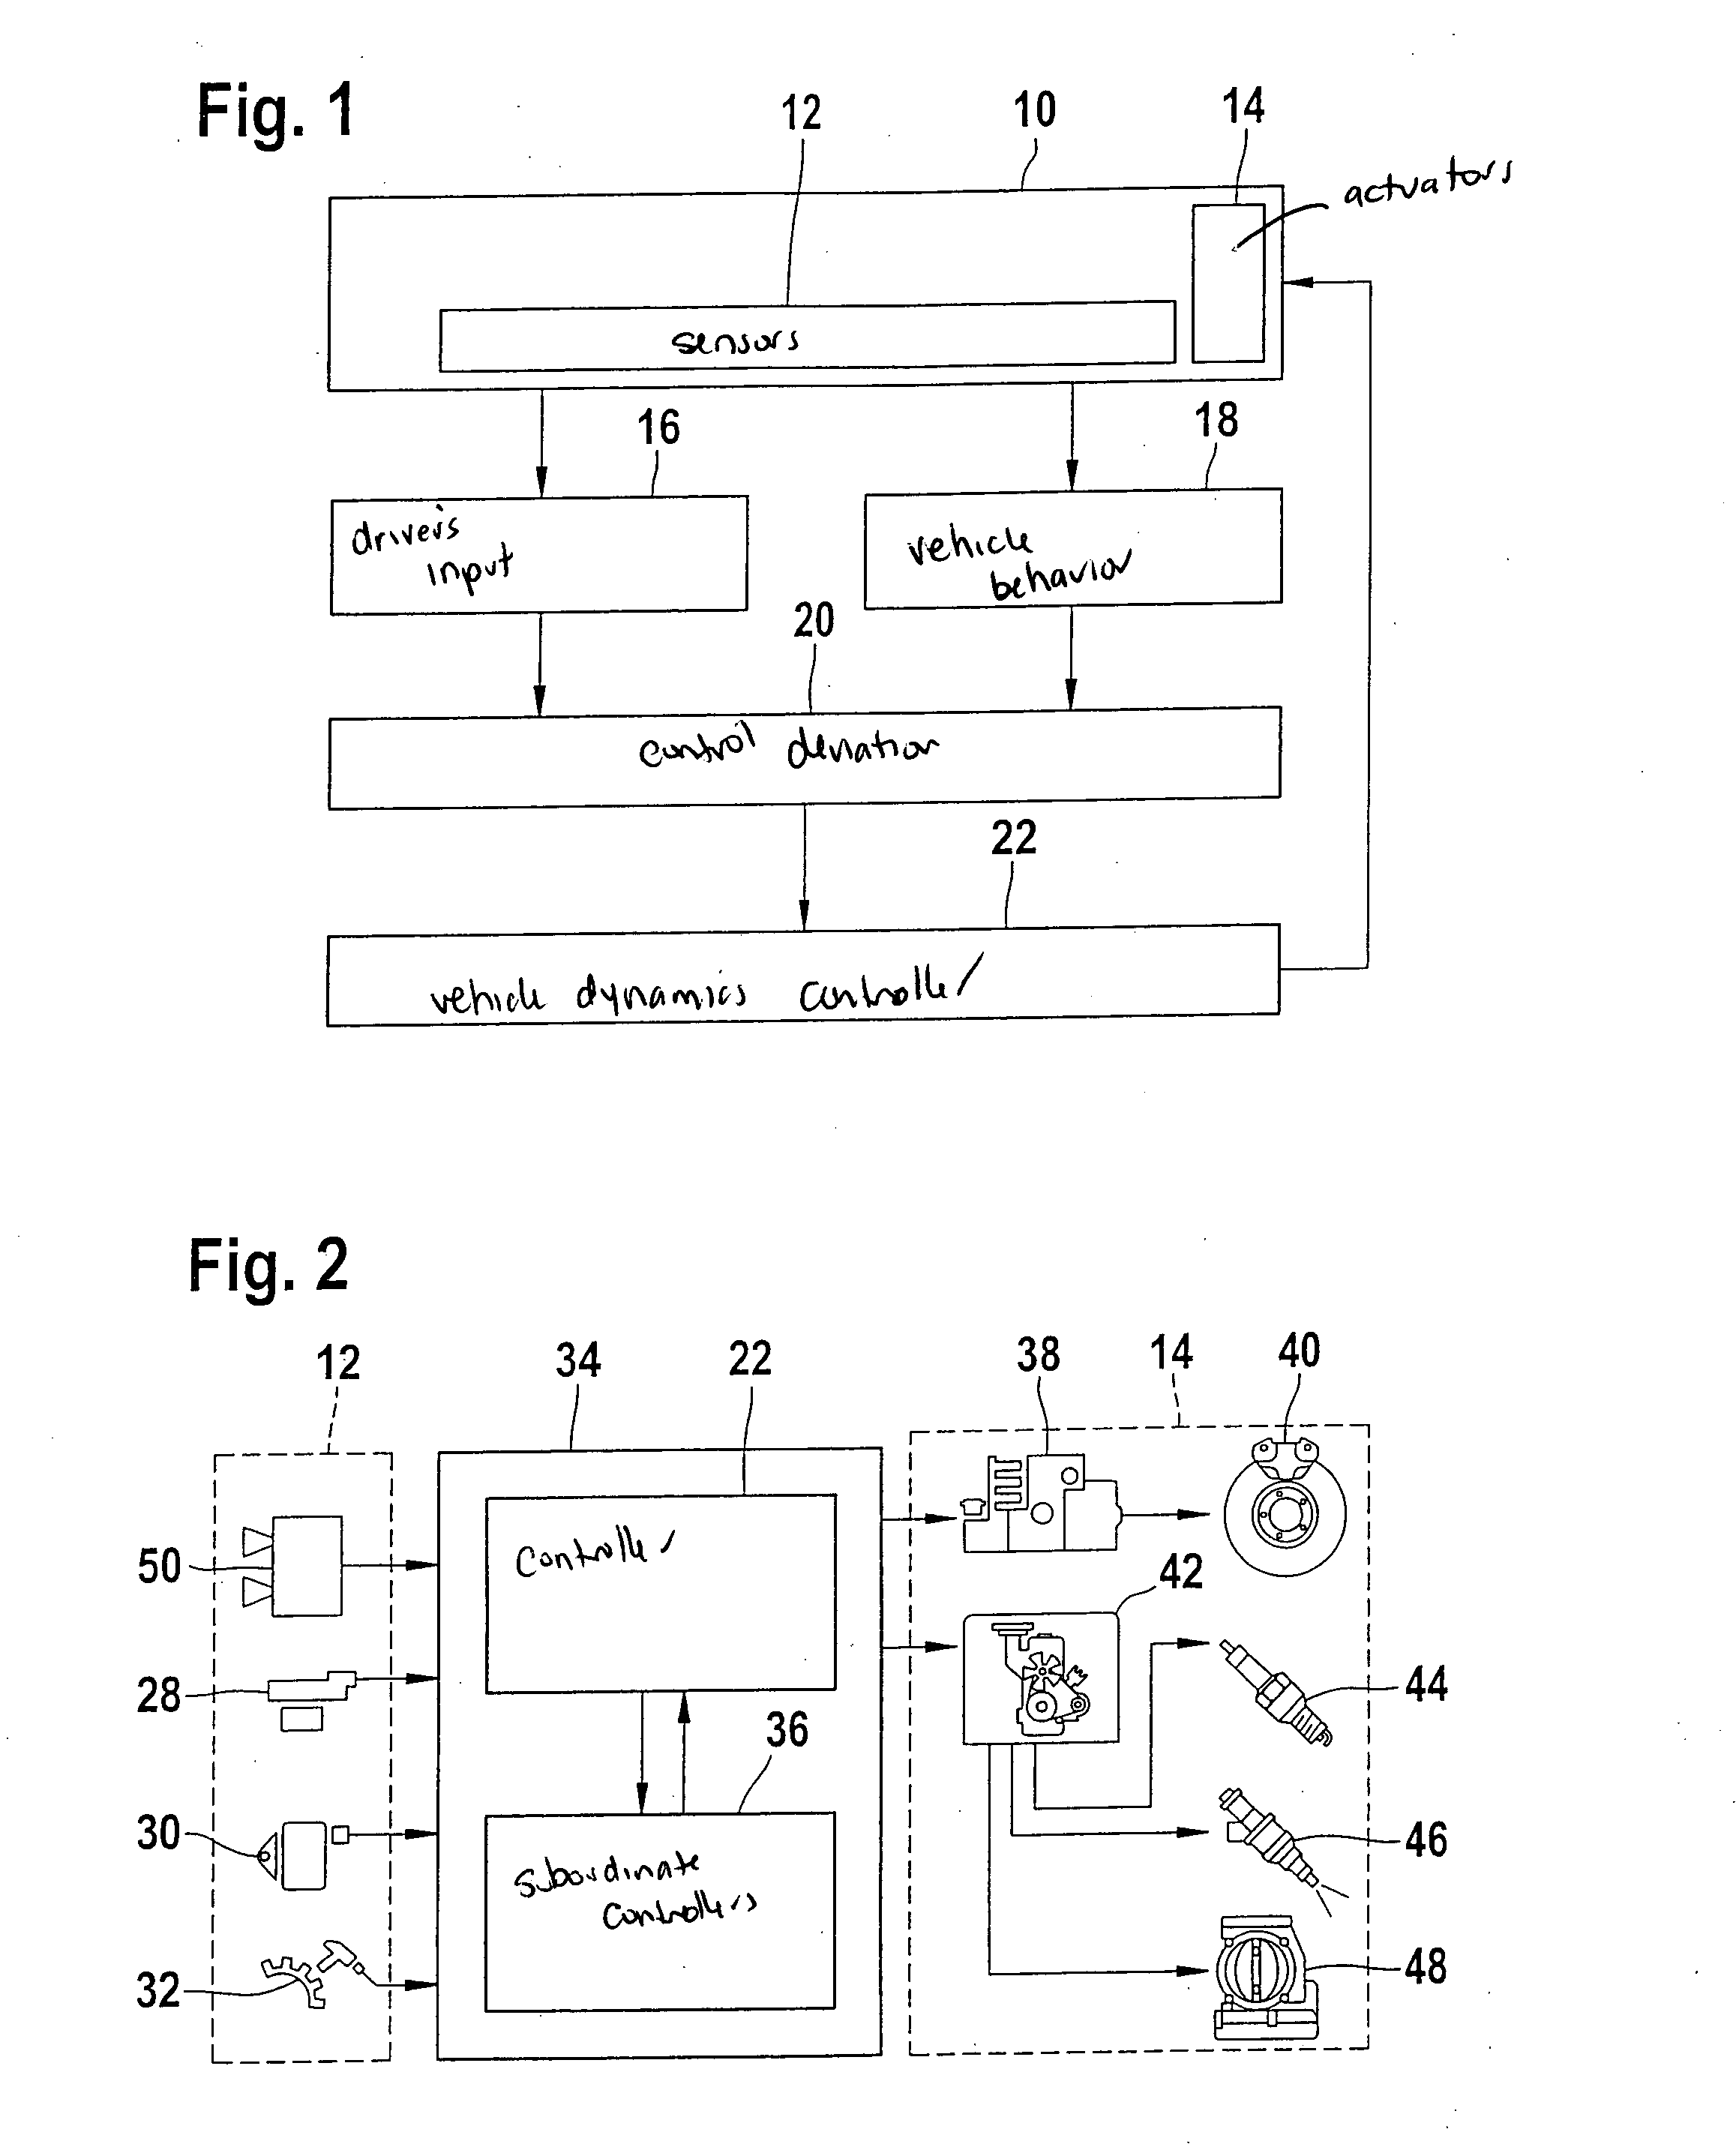 Controlling vehicle dynamics through the use of an image sensor system